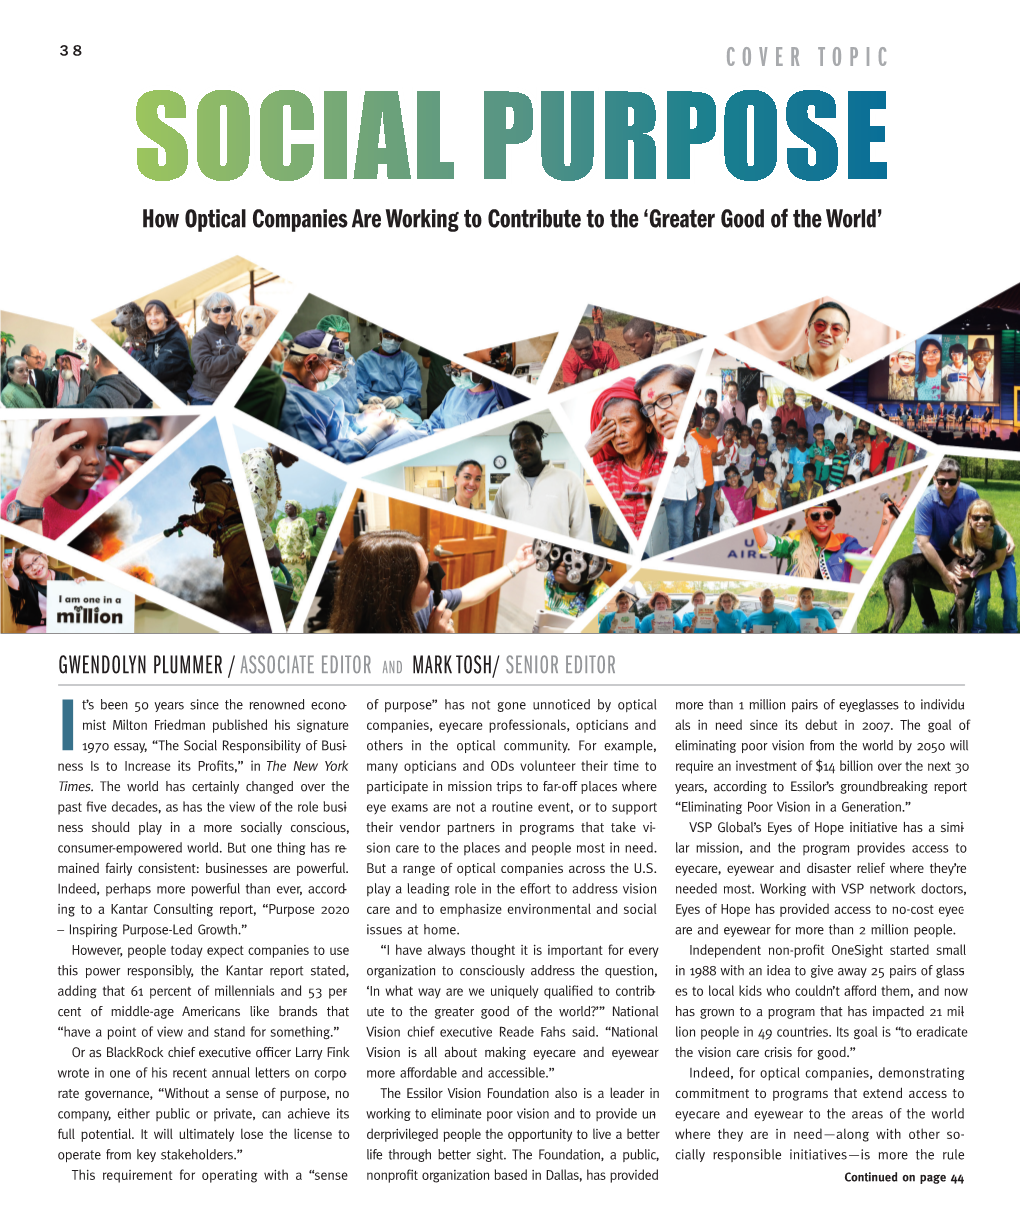 COVER TOPIC SOCIAL PURPOSE How Optical Companies Are Working to Contribute to the ‘Greater Good of the World’